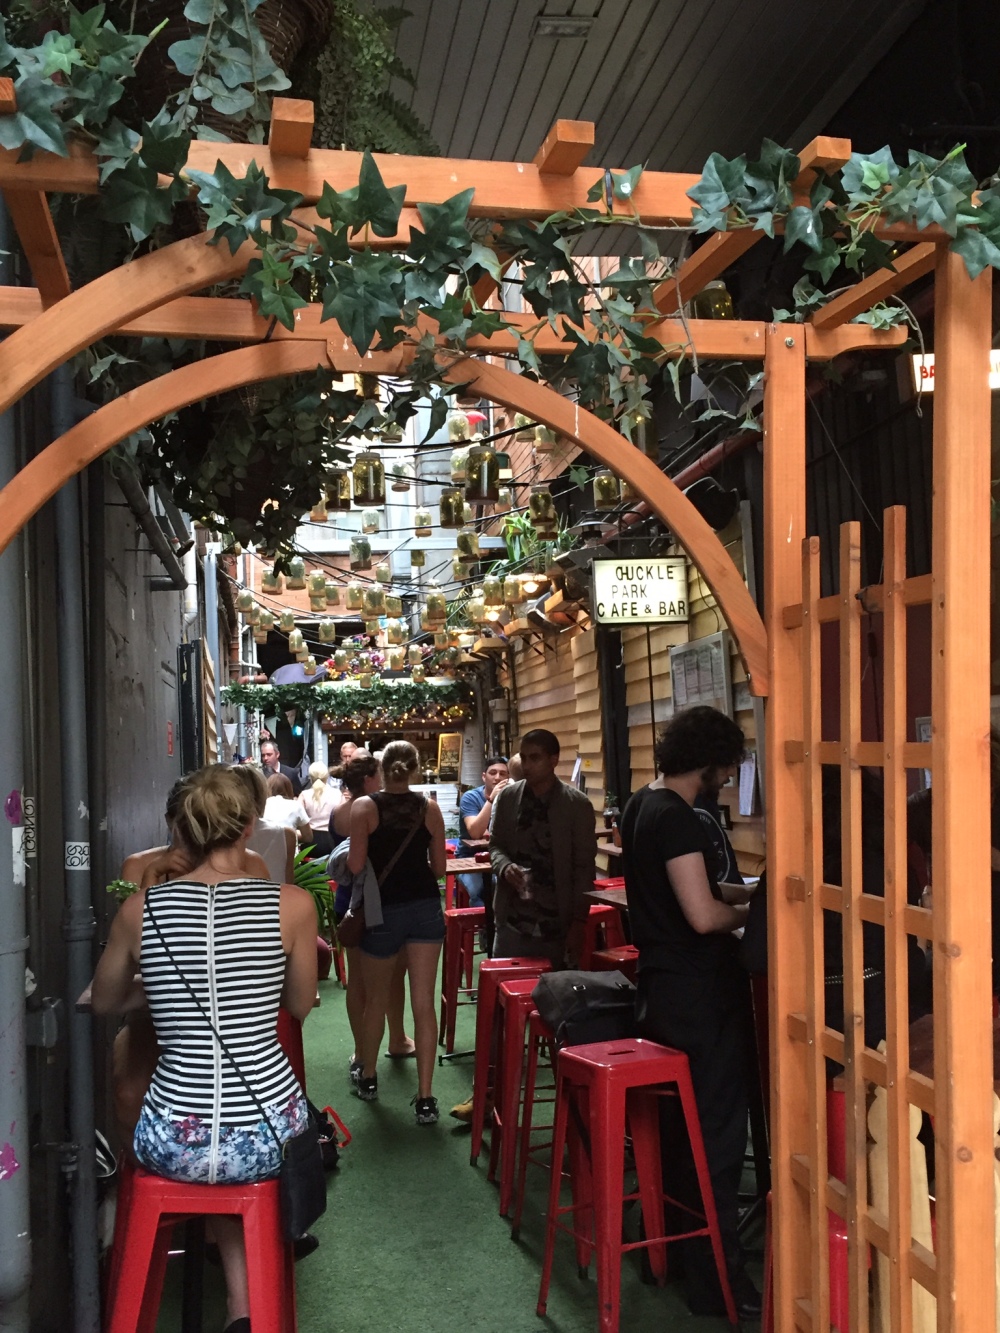 One of the many hidden cafes we ate/drank at in Melbourne.